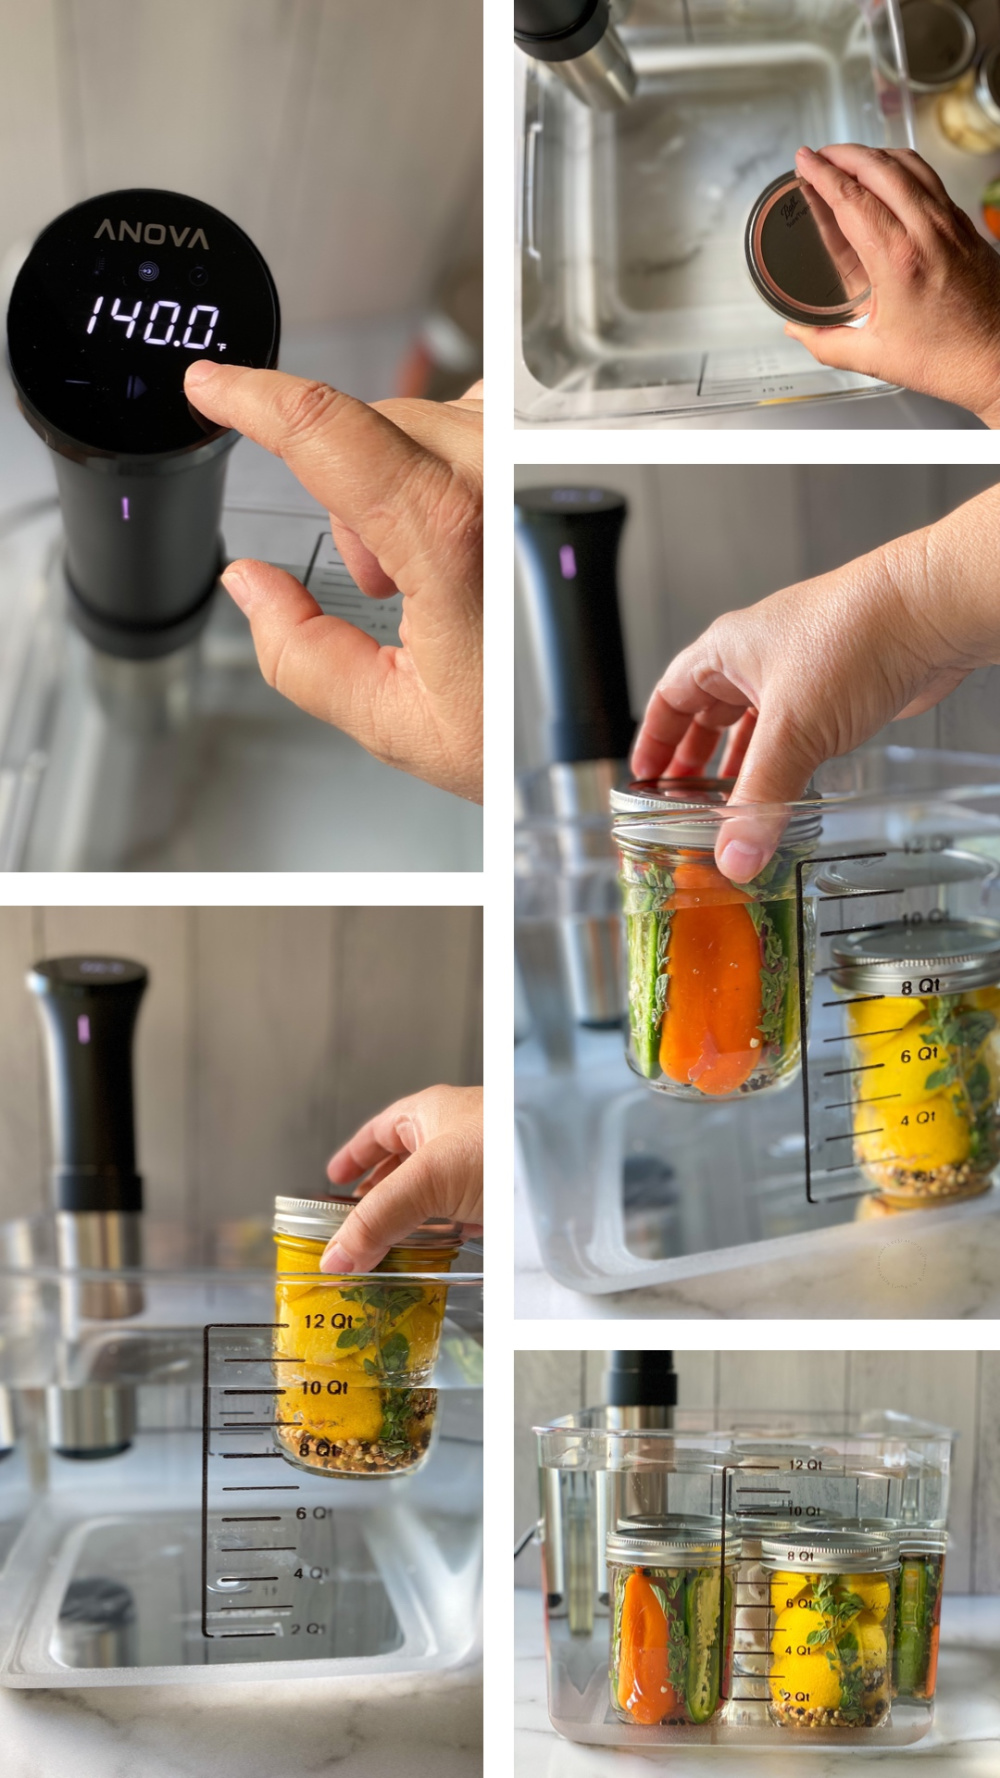 A collage of images showing the step by step process on pickling veggies using the Anova Precision Cooker